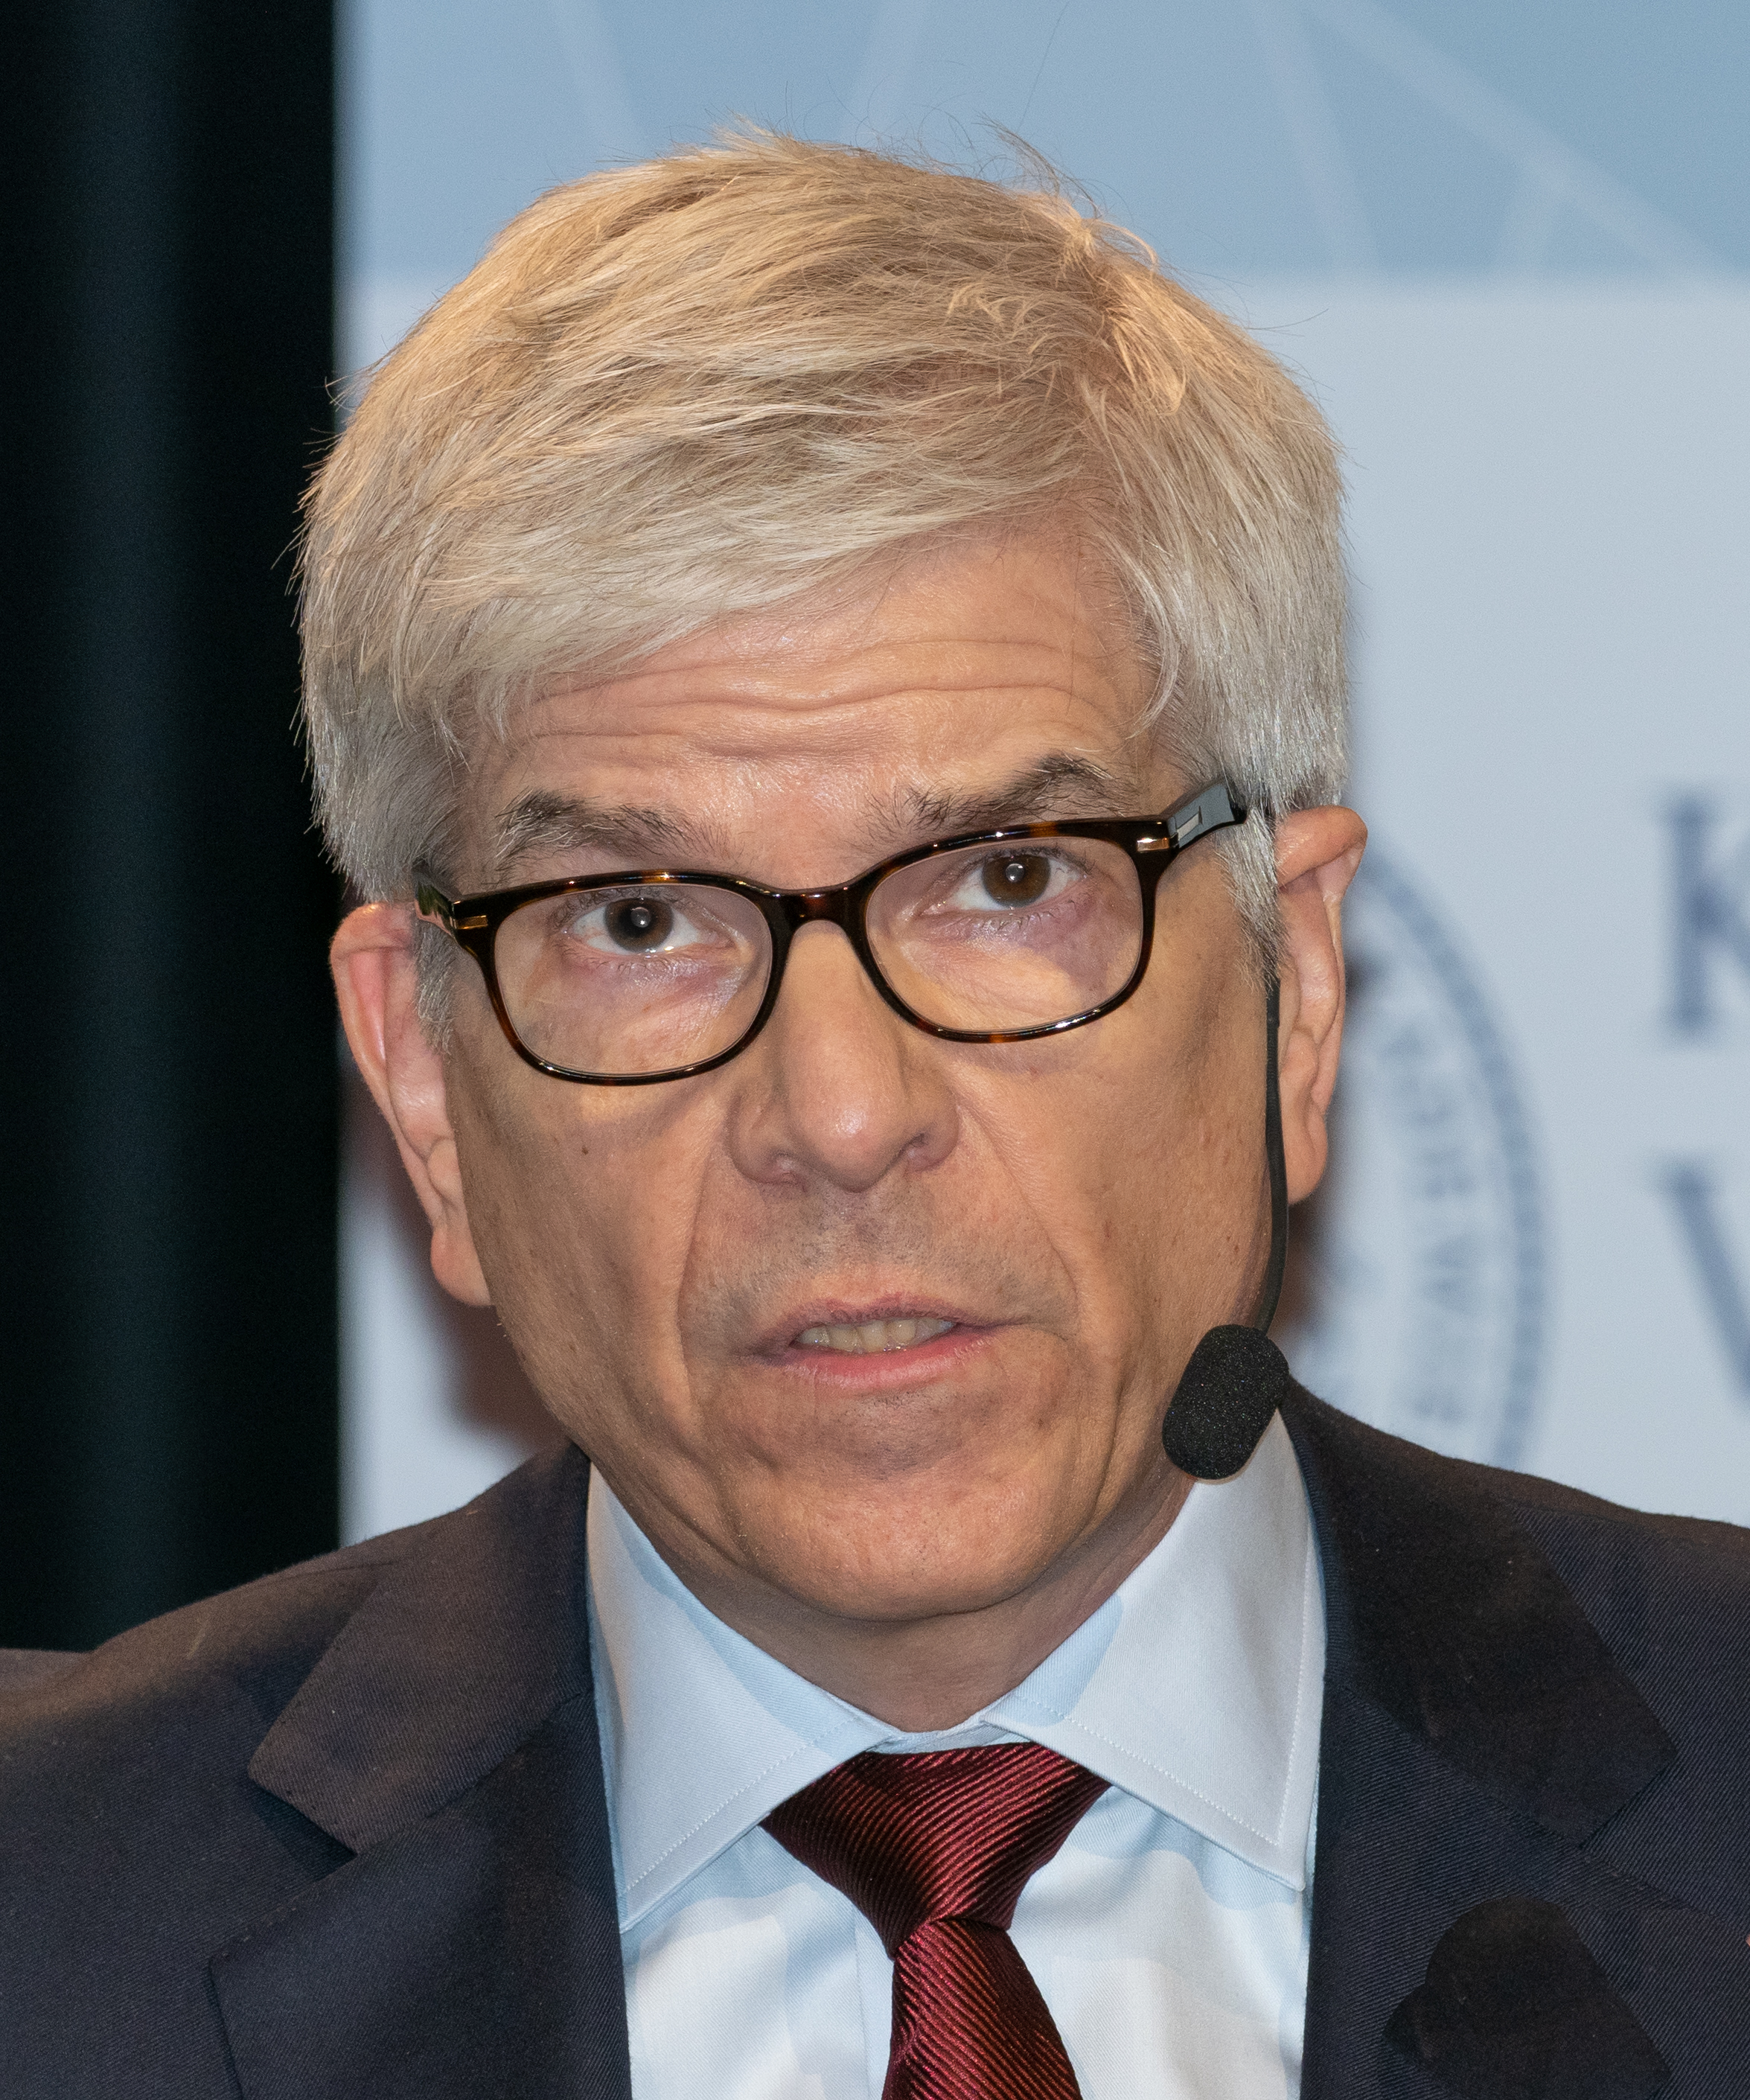 Paul Romer at the Nobel Memorial Prize CeremonyBy Bengt Nyman from Vaxholm, Sweden - EM1B6039, CC BY 2.0, https://commons.wikimedia.org/w/index.php?curid=74934767